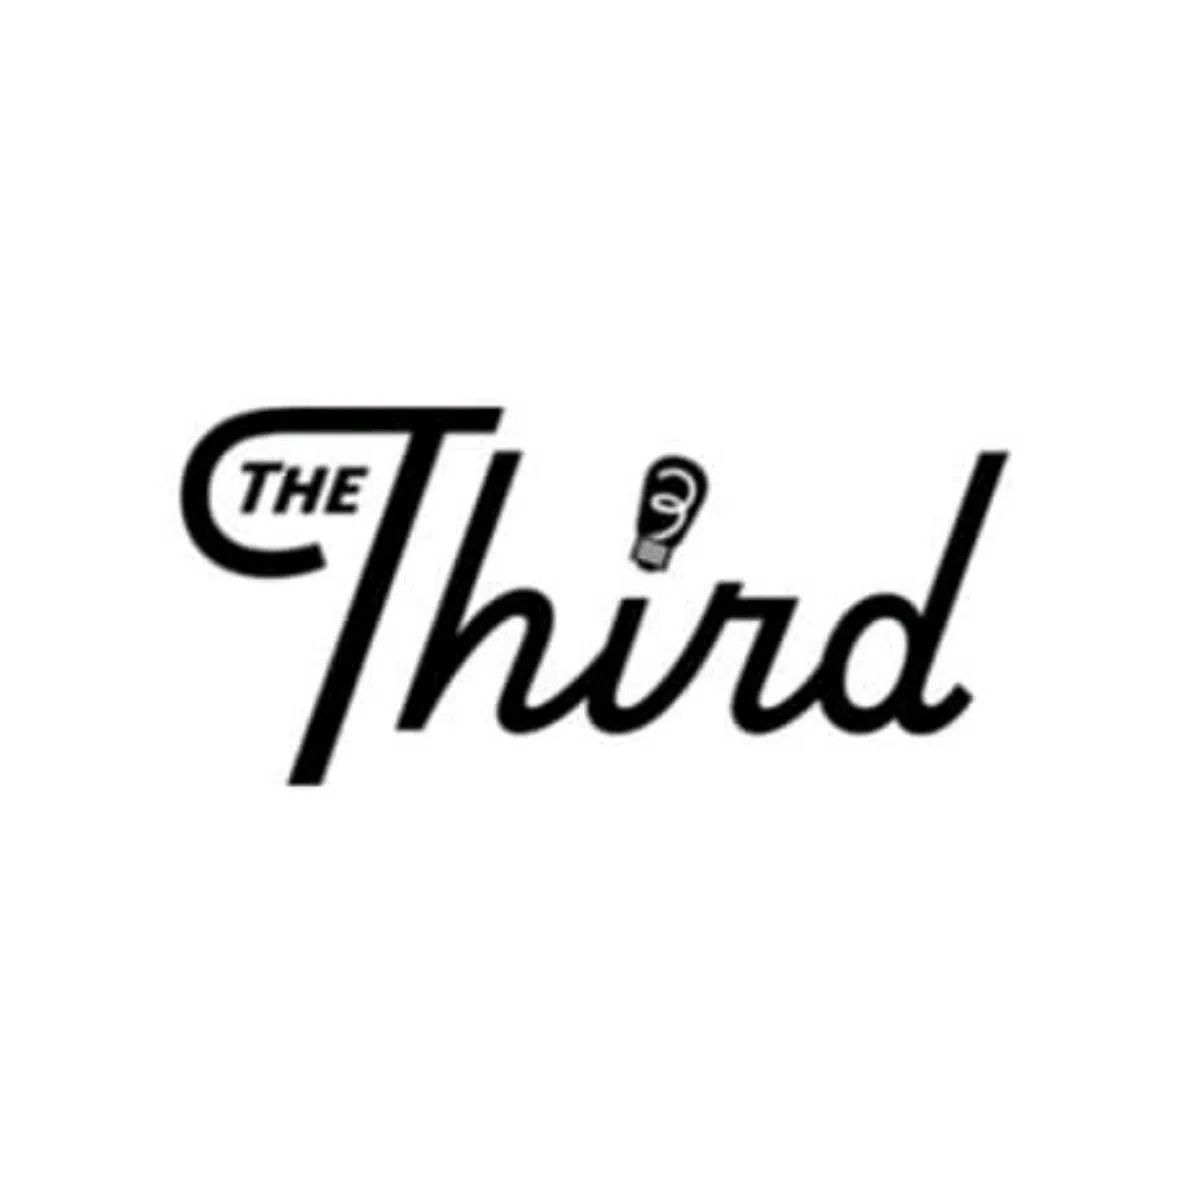 DOWNLOAD: The Third – “Mechanica” Mp3